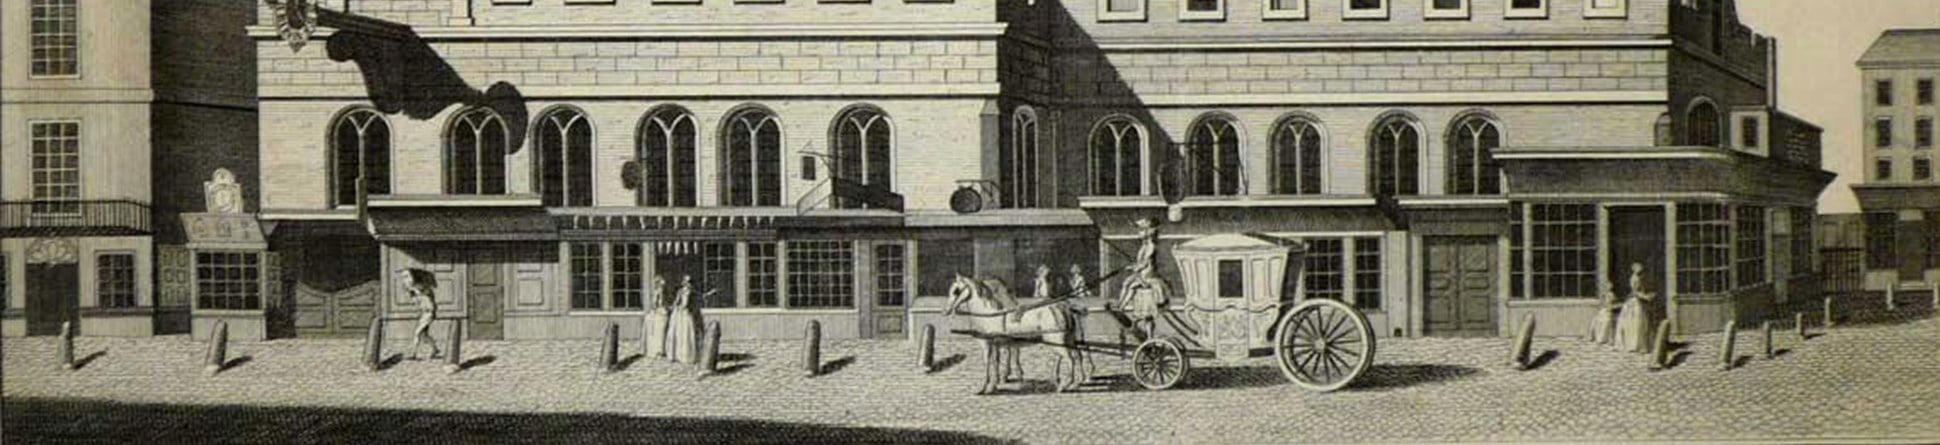 Monochrome illustration of St Dunstan's Church and passing pedestrians and carriages.